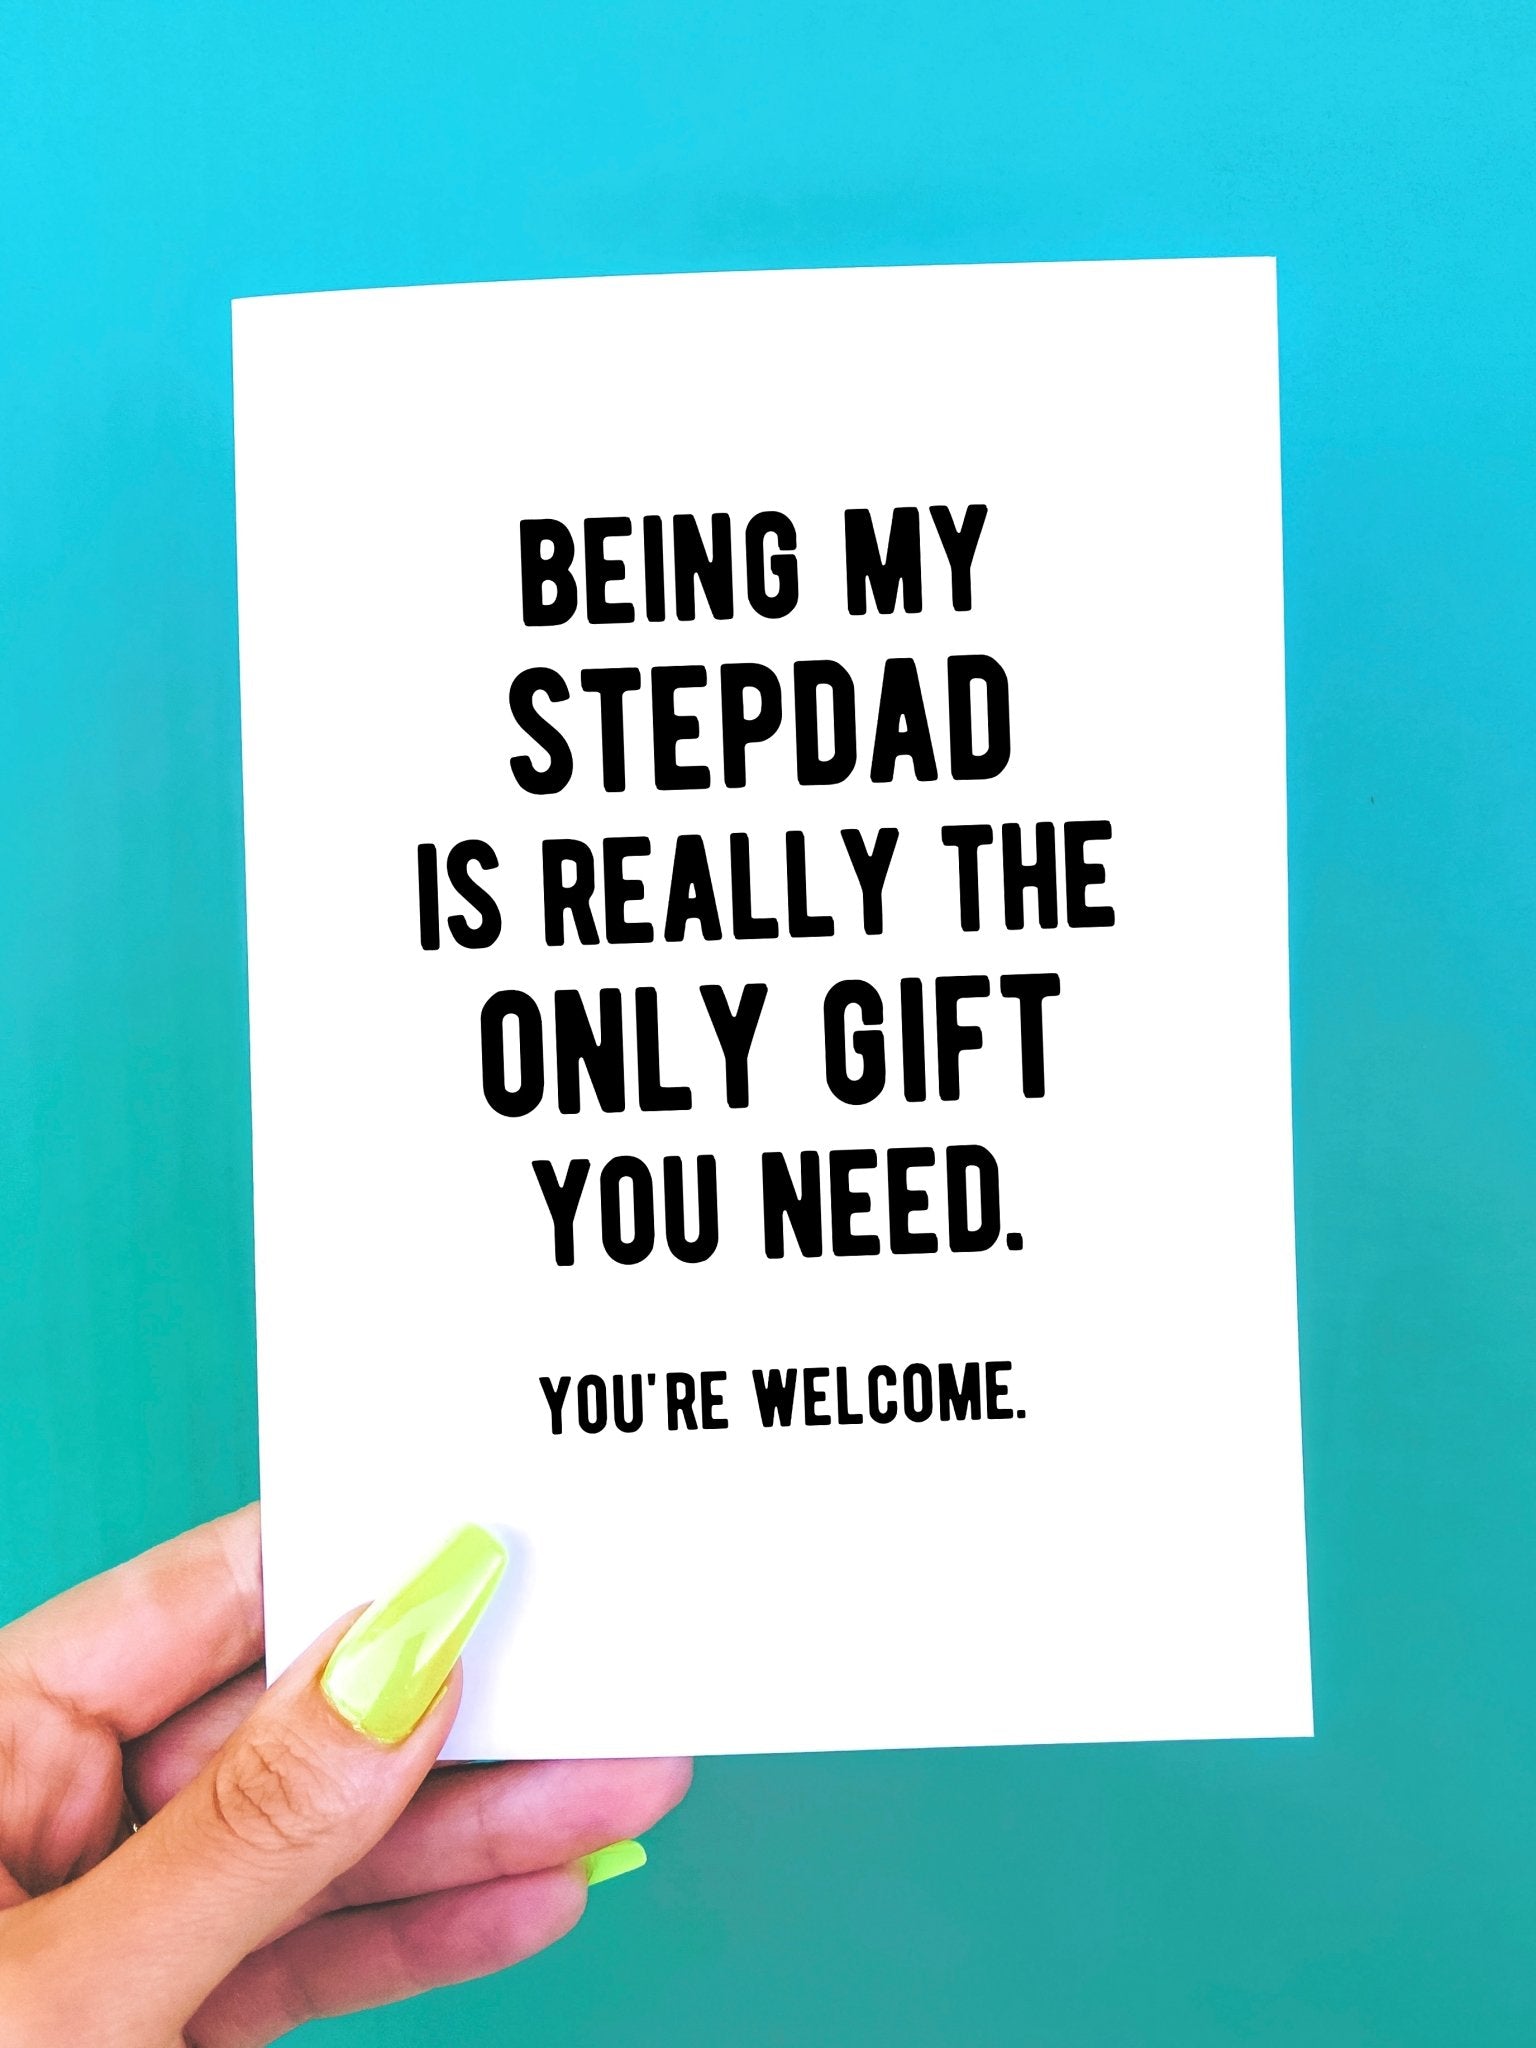 Being My Stepdad Is Really The Only Gift You Need Greeting Card - UntamedEgo LLC.